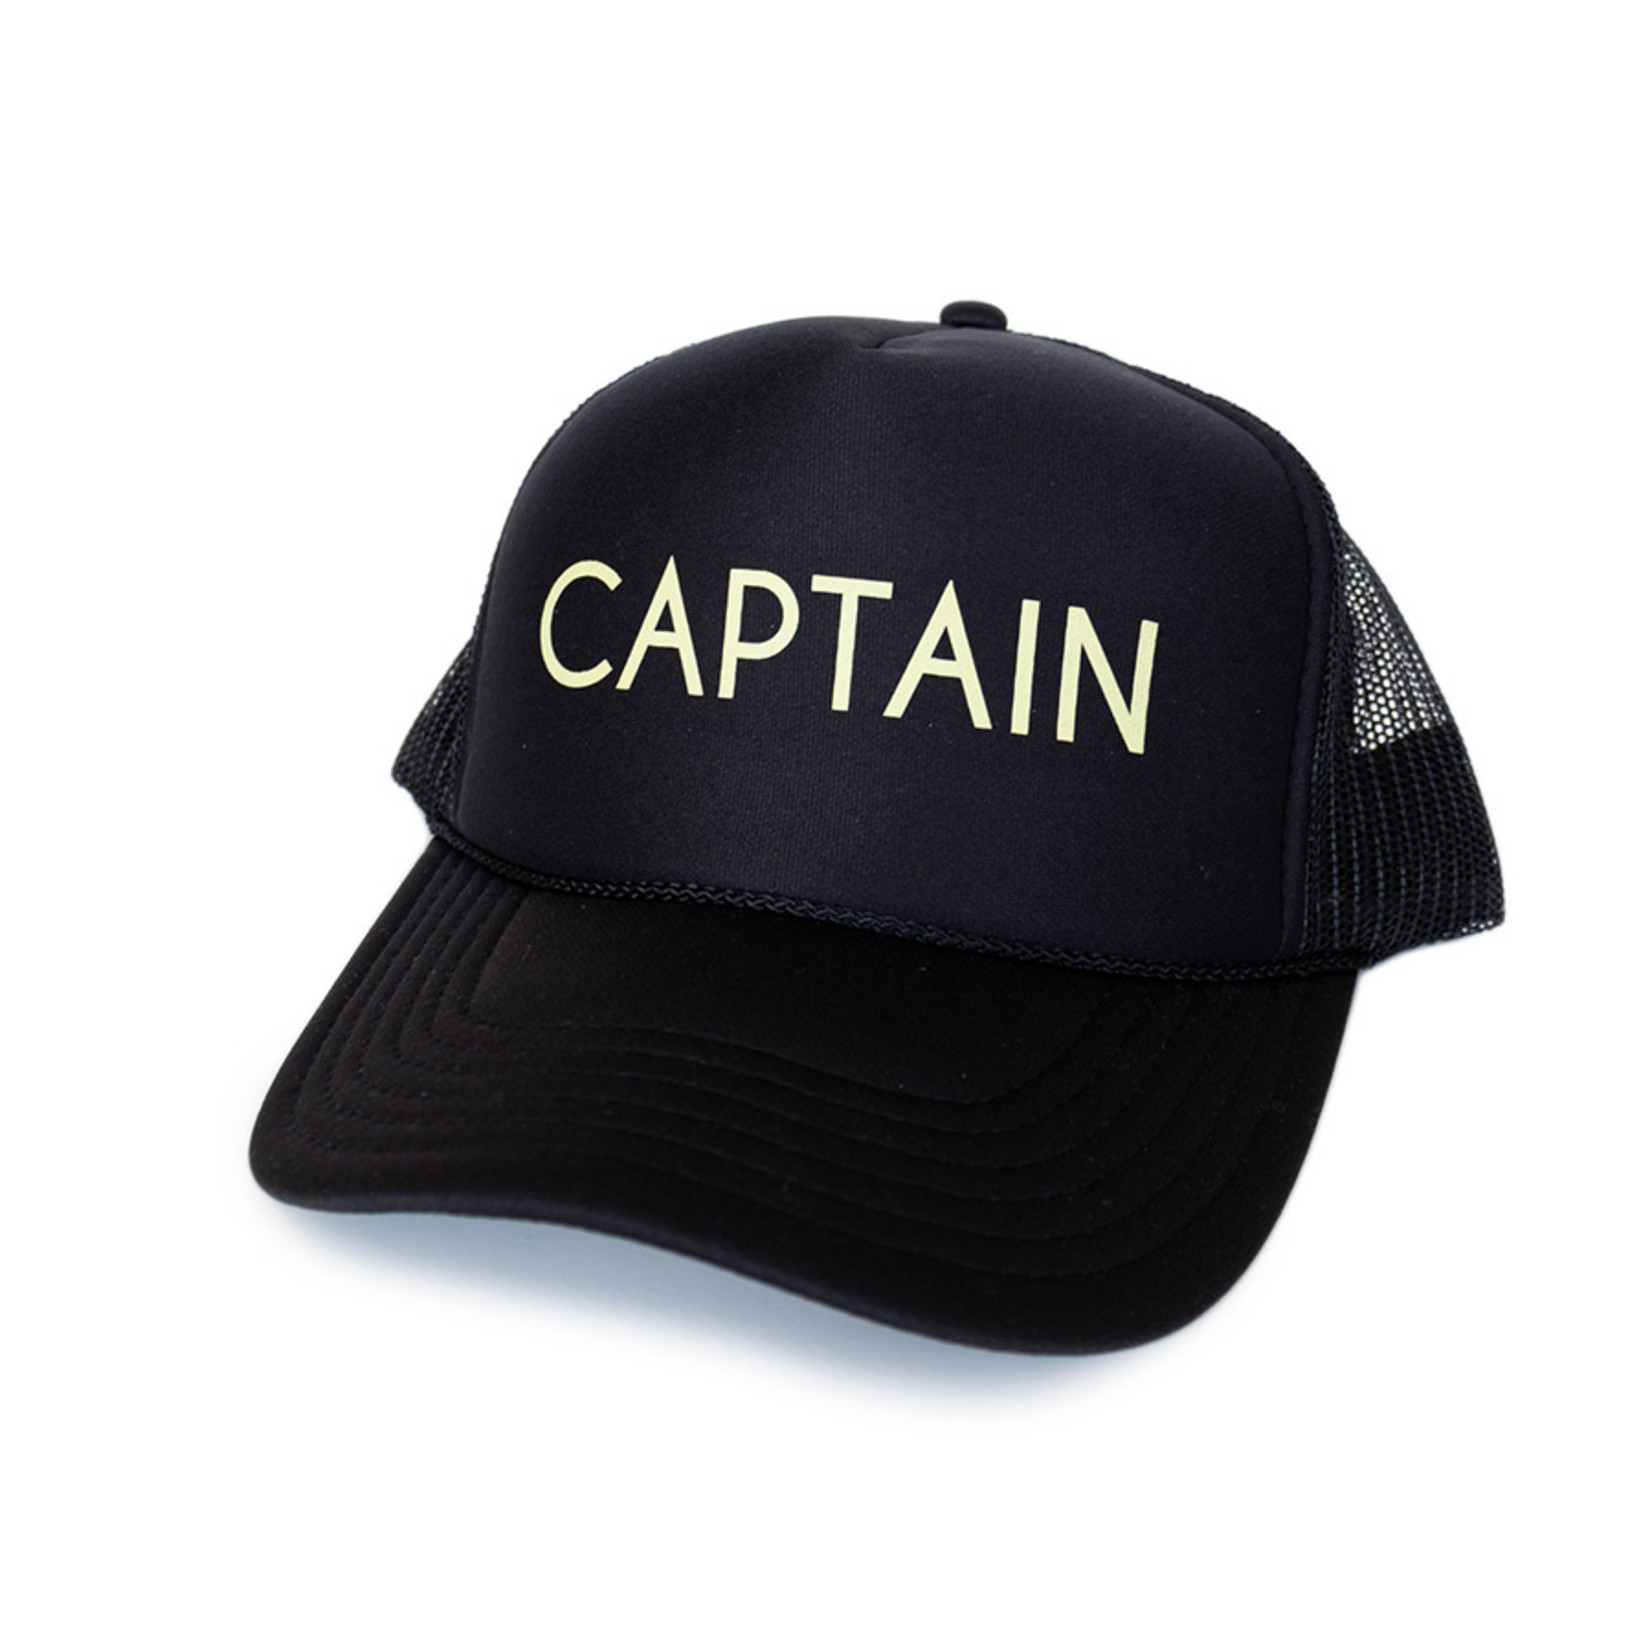 Mothersun and the Captain The Captain Trucker Hat